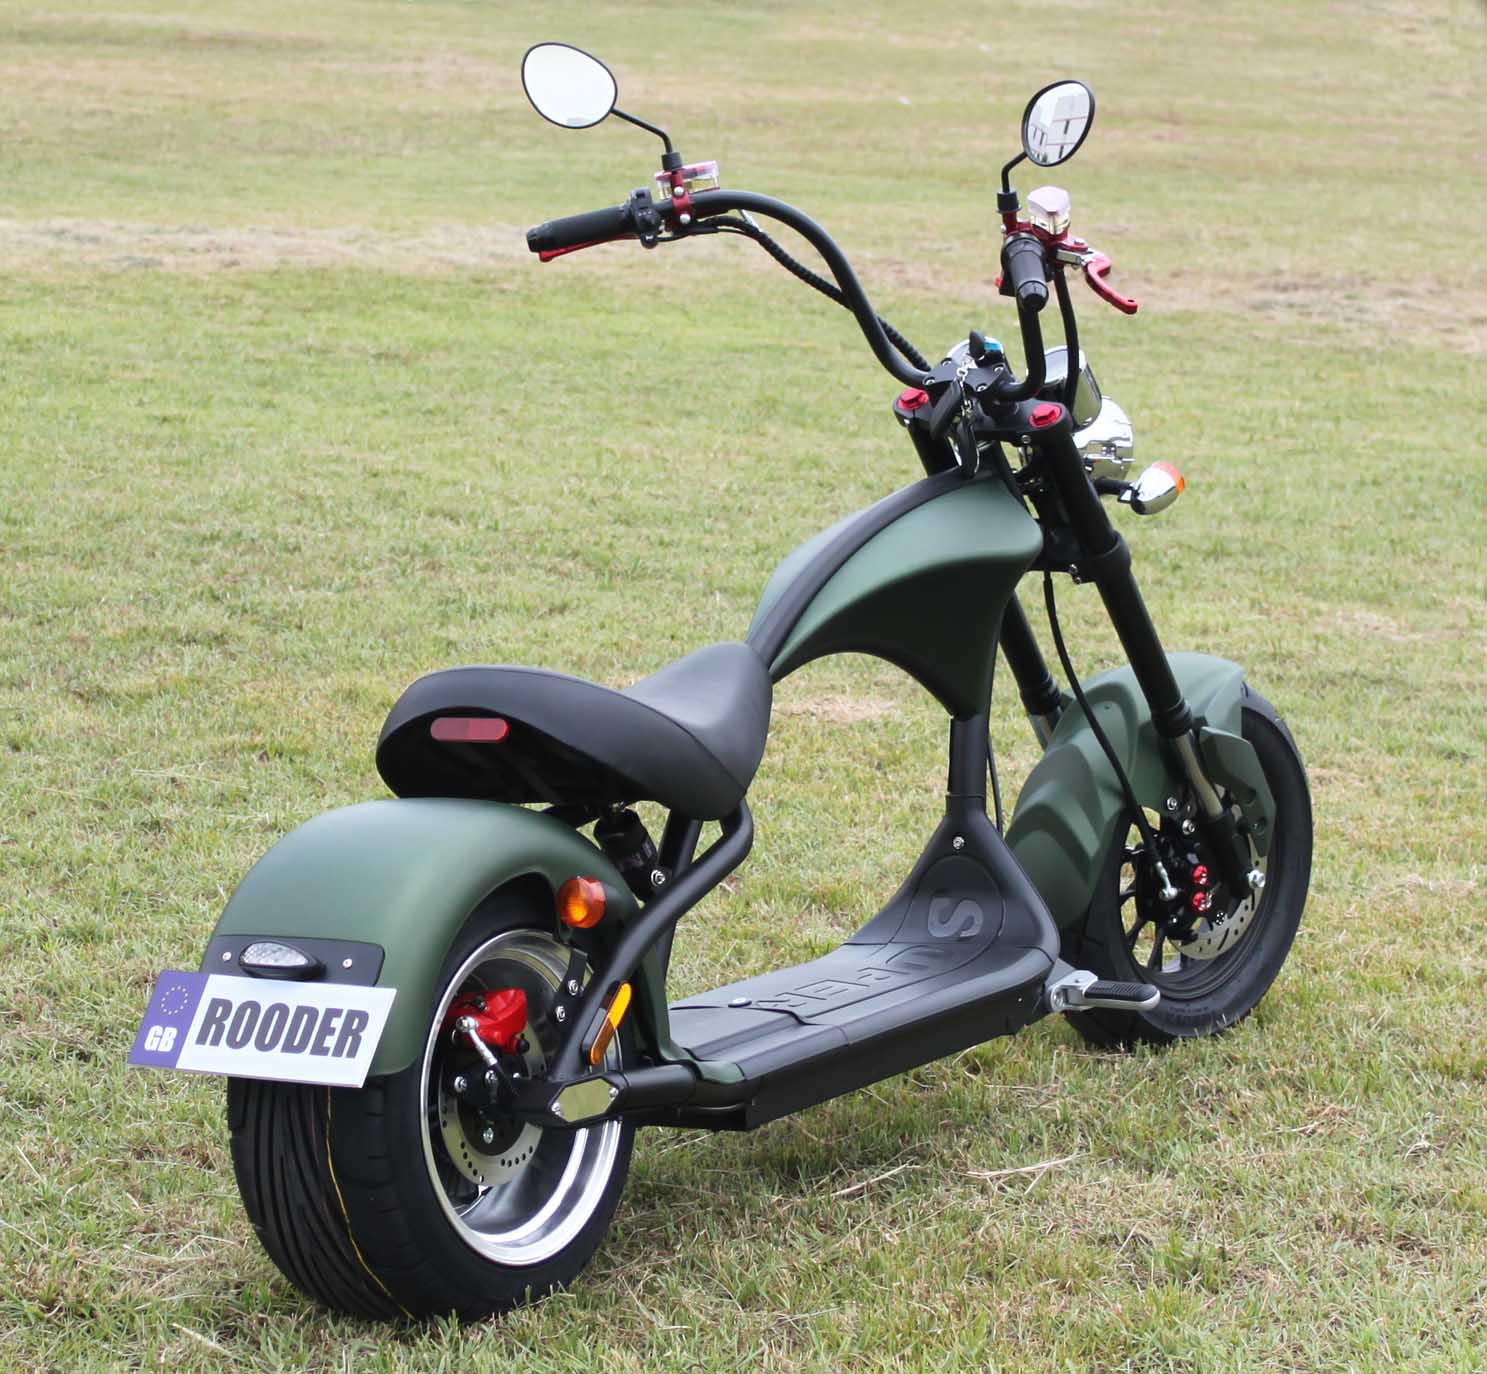 Mangosteen m1 Rooder super citycoco chopper electric scooter review